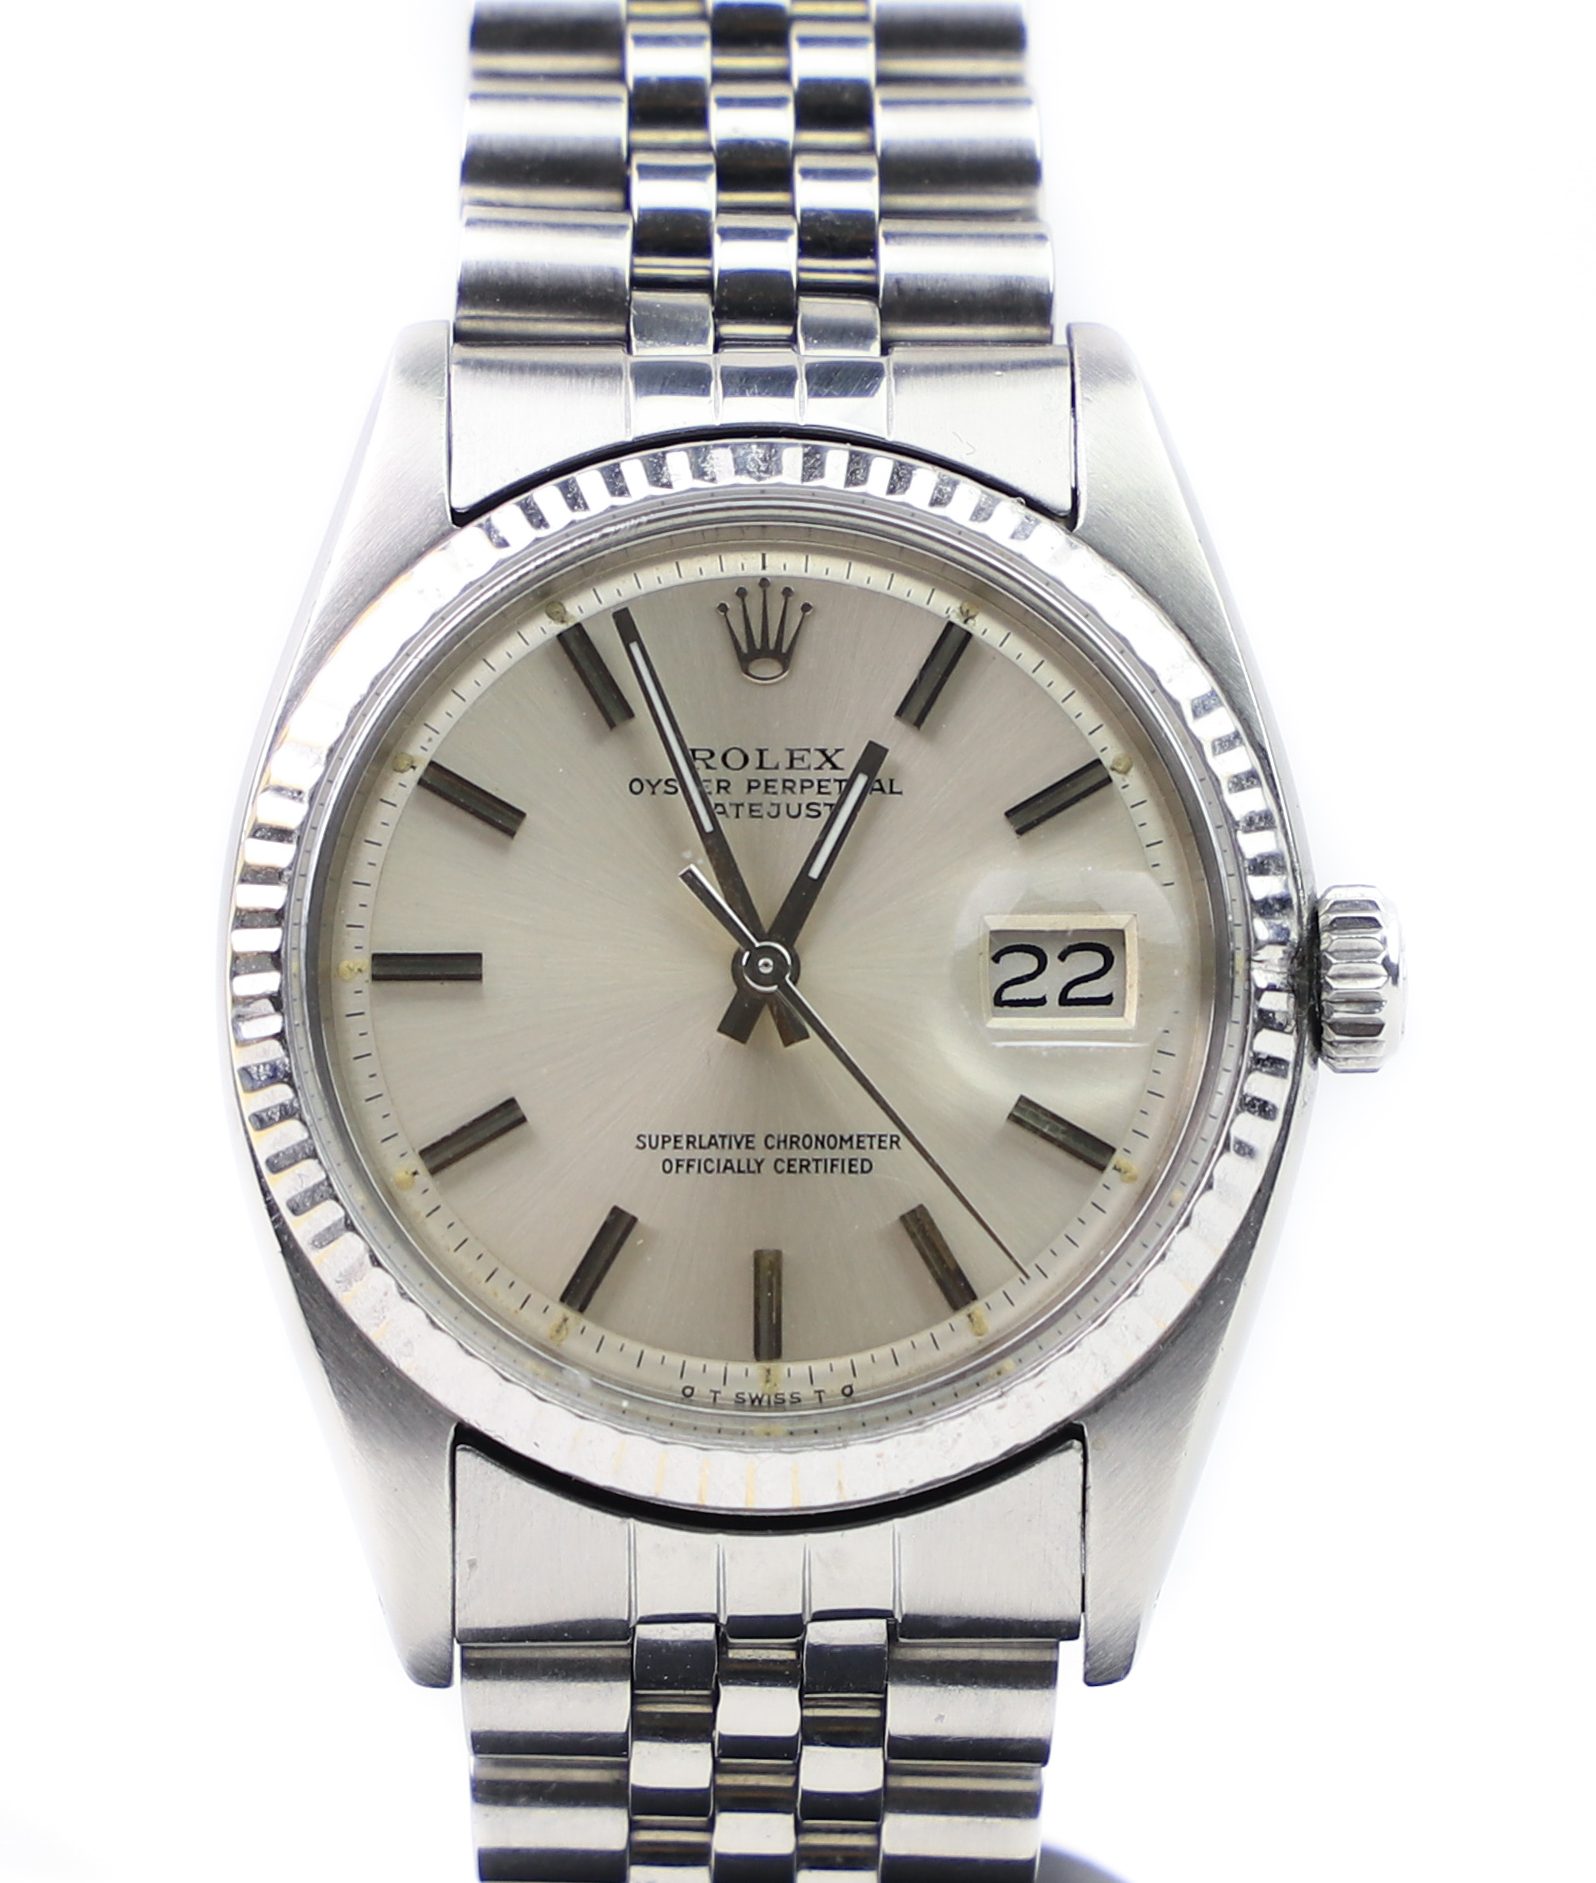 how much did a rolex cost in 1960